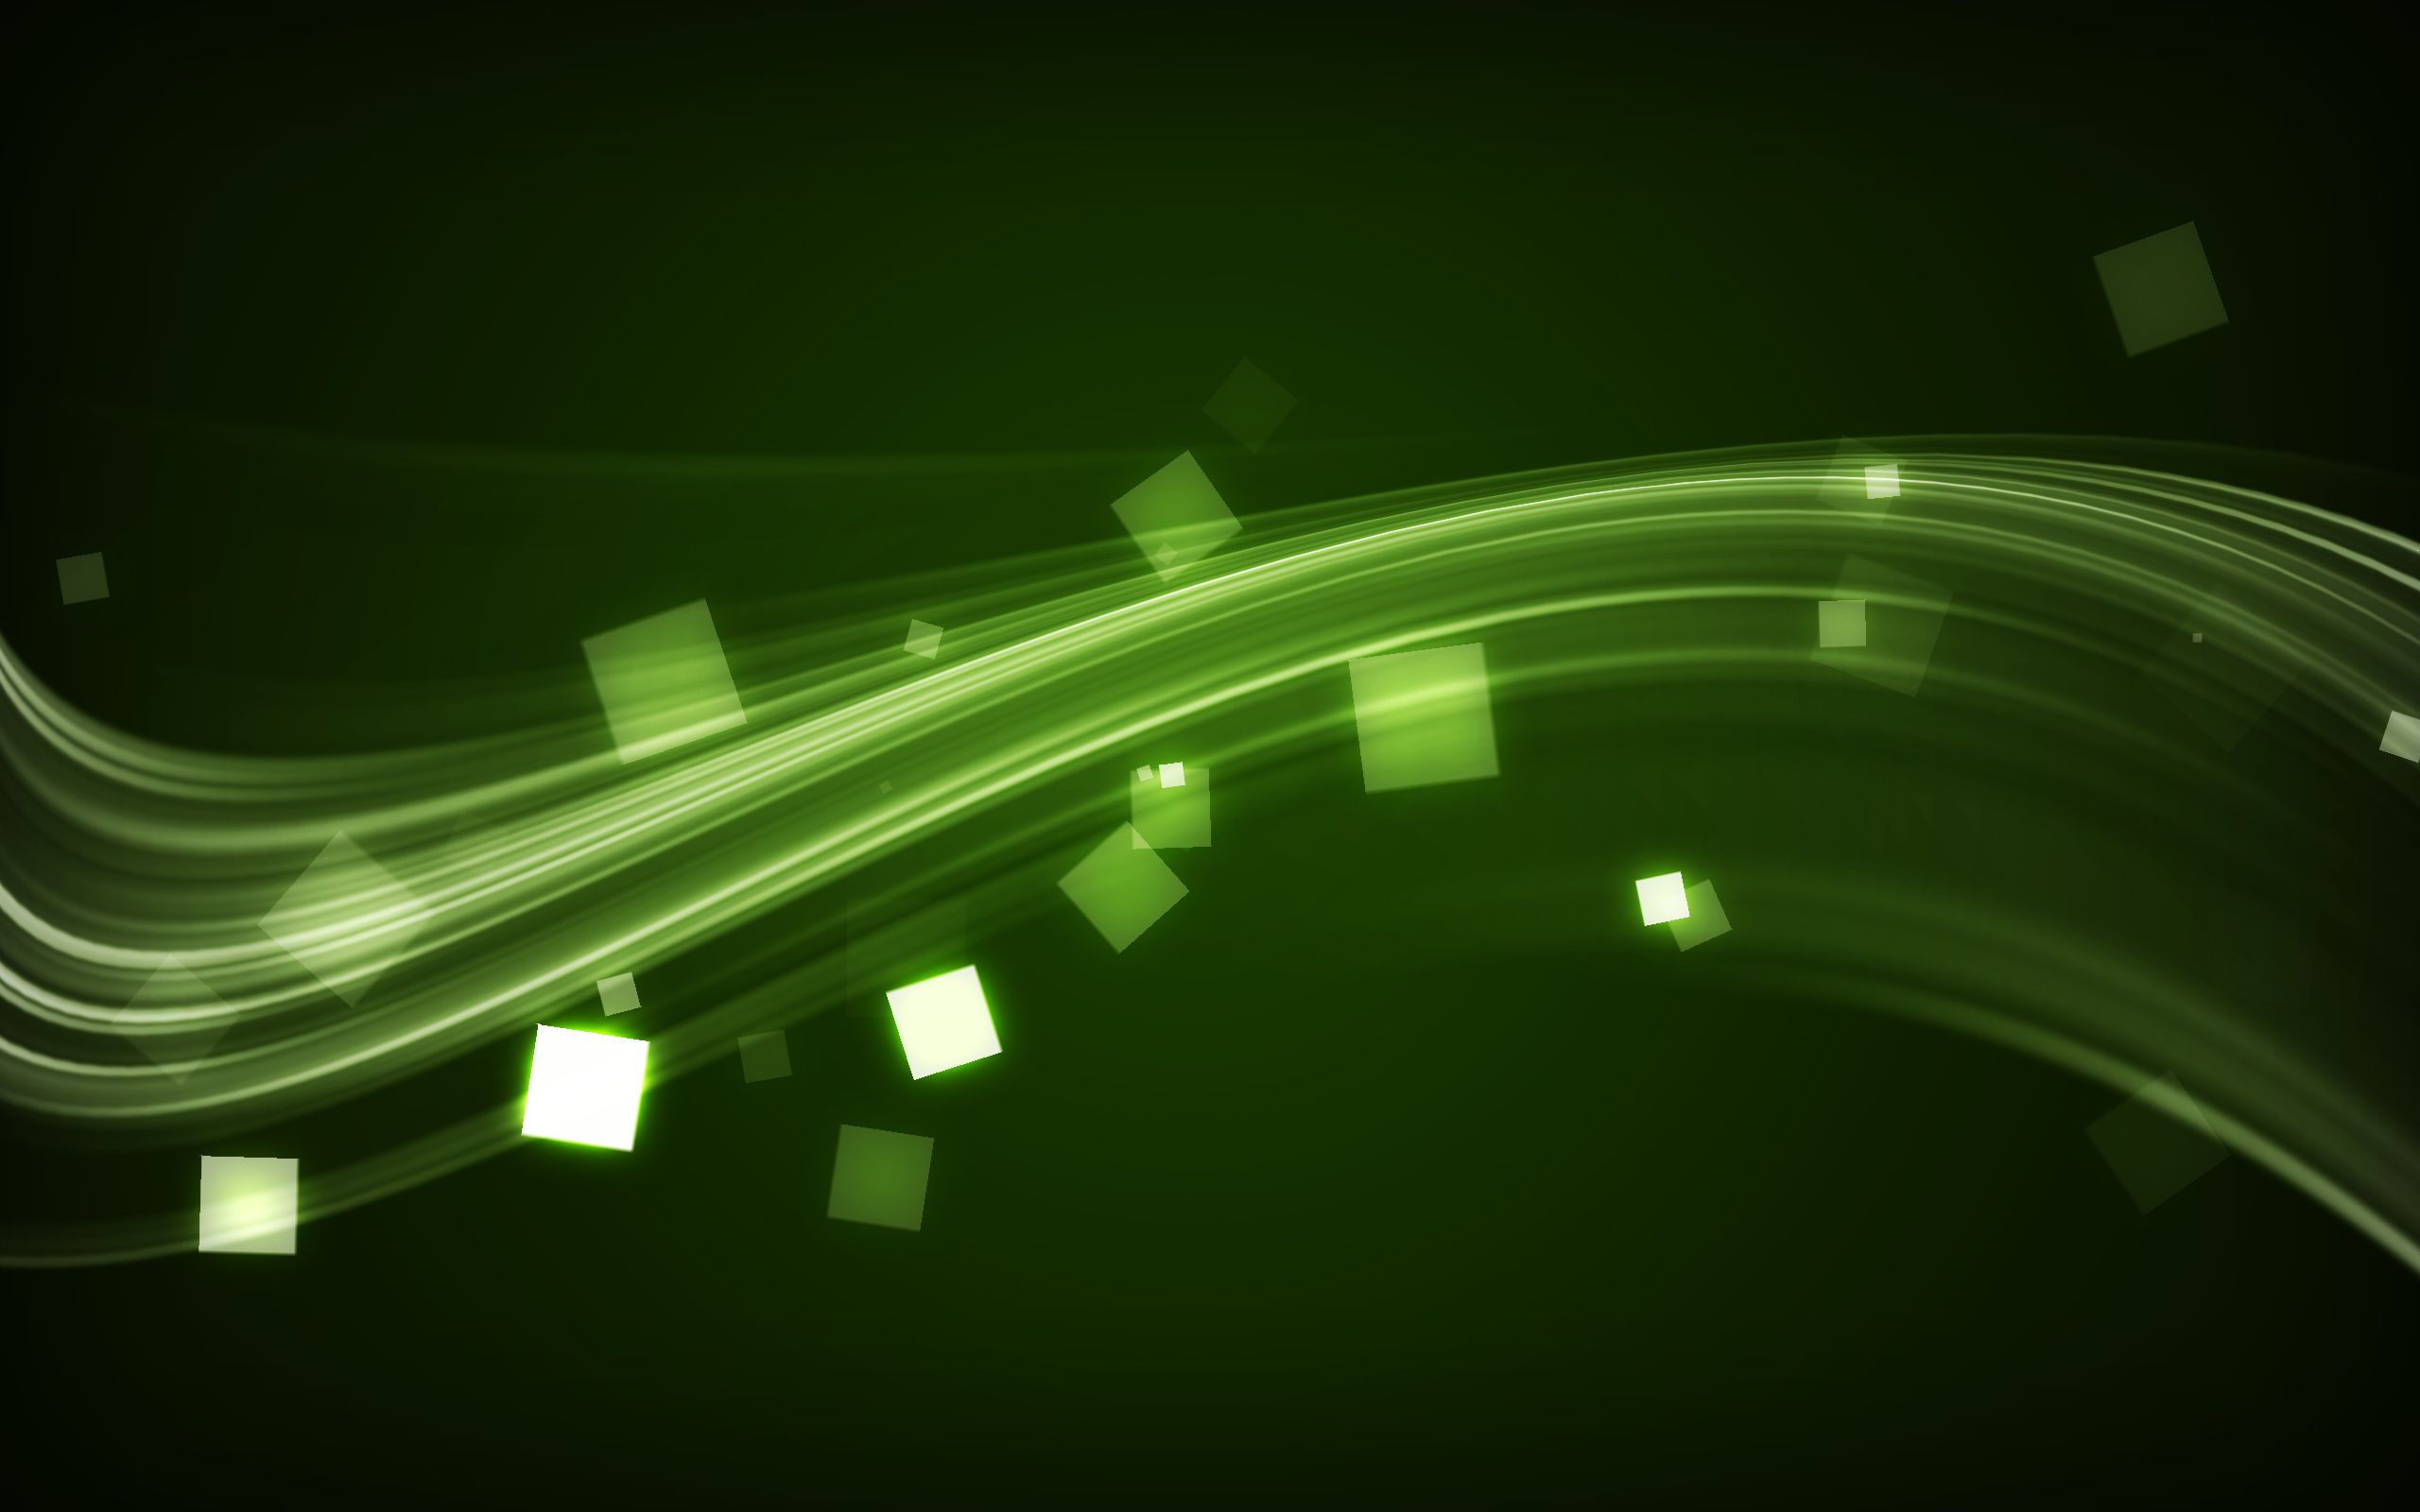 Free Download 44 HD Green Wallpapers for Windows and Mac Systems